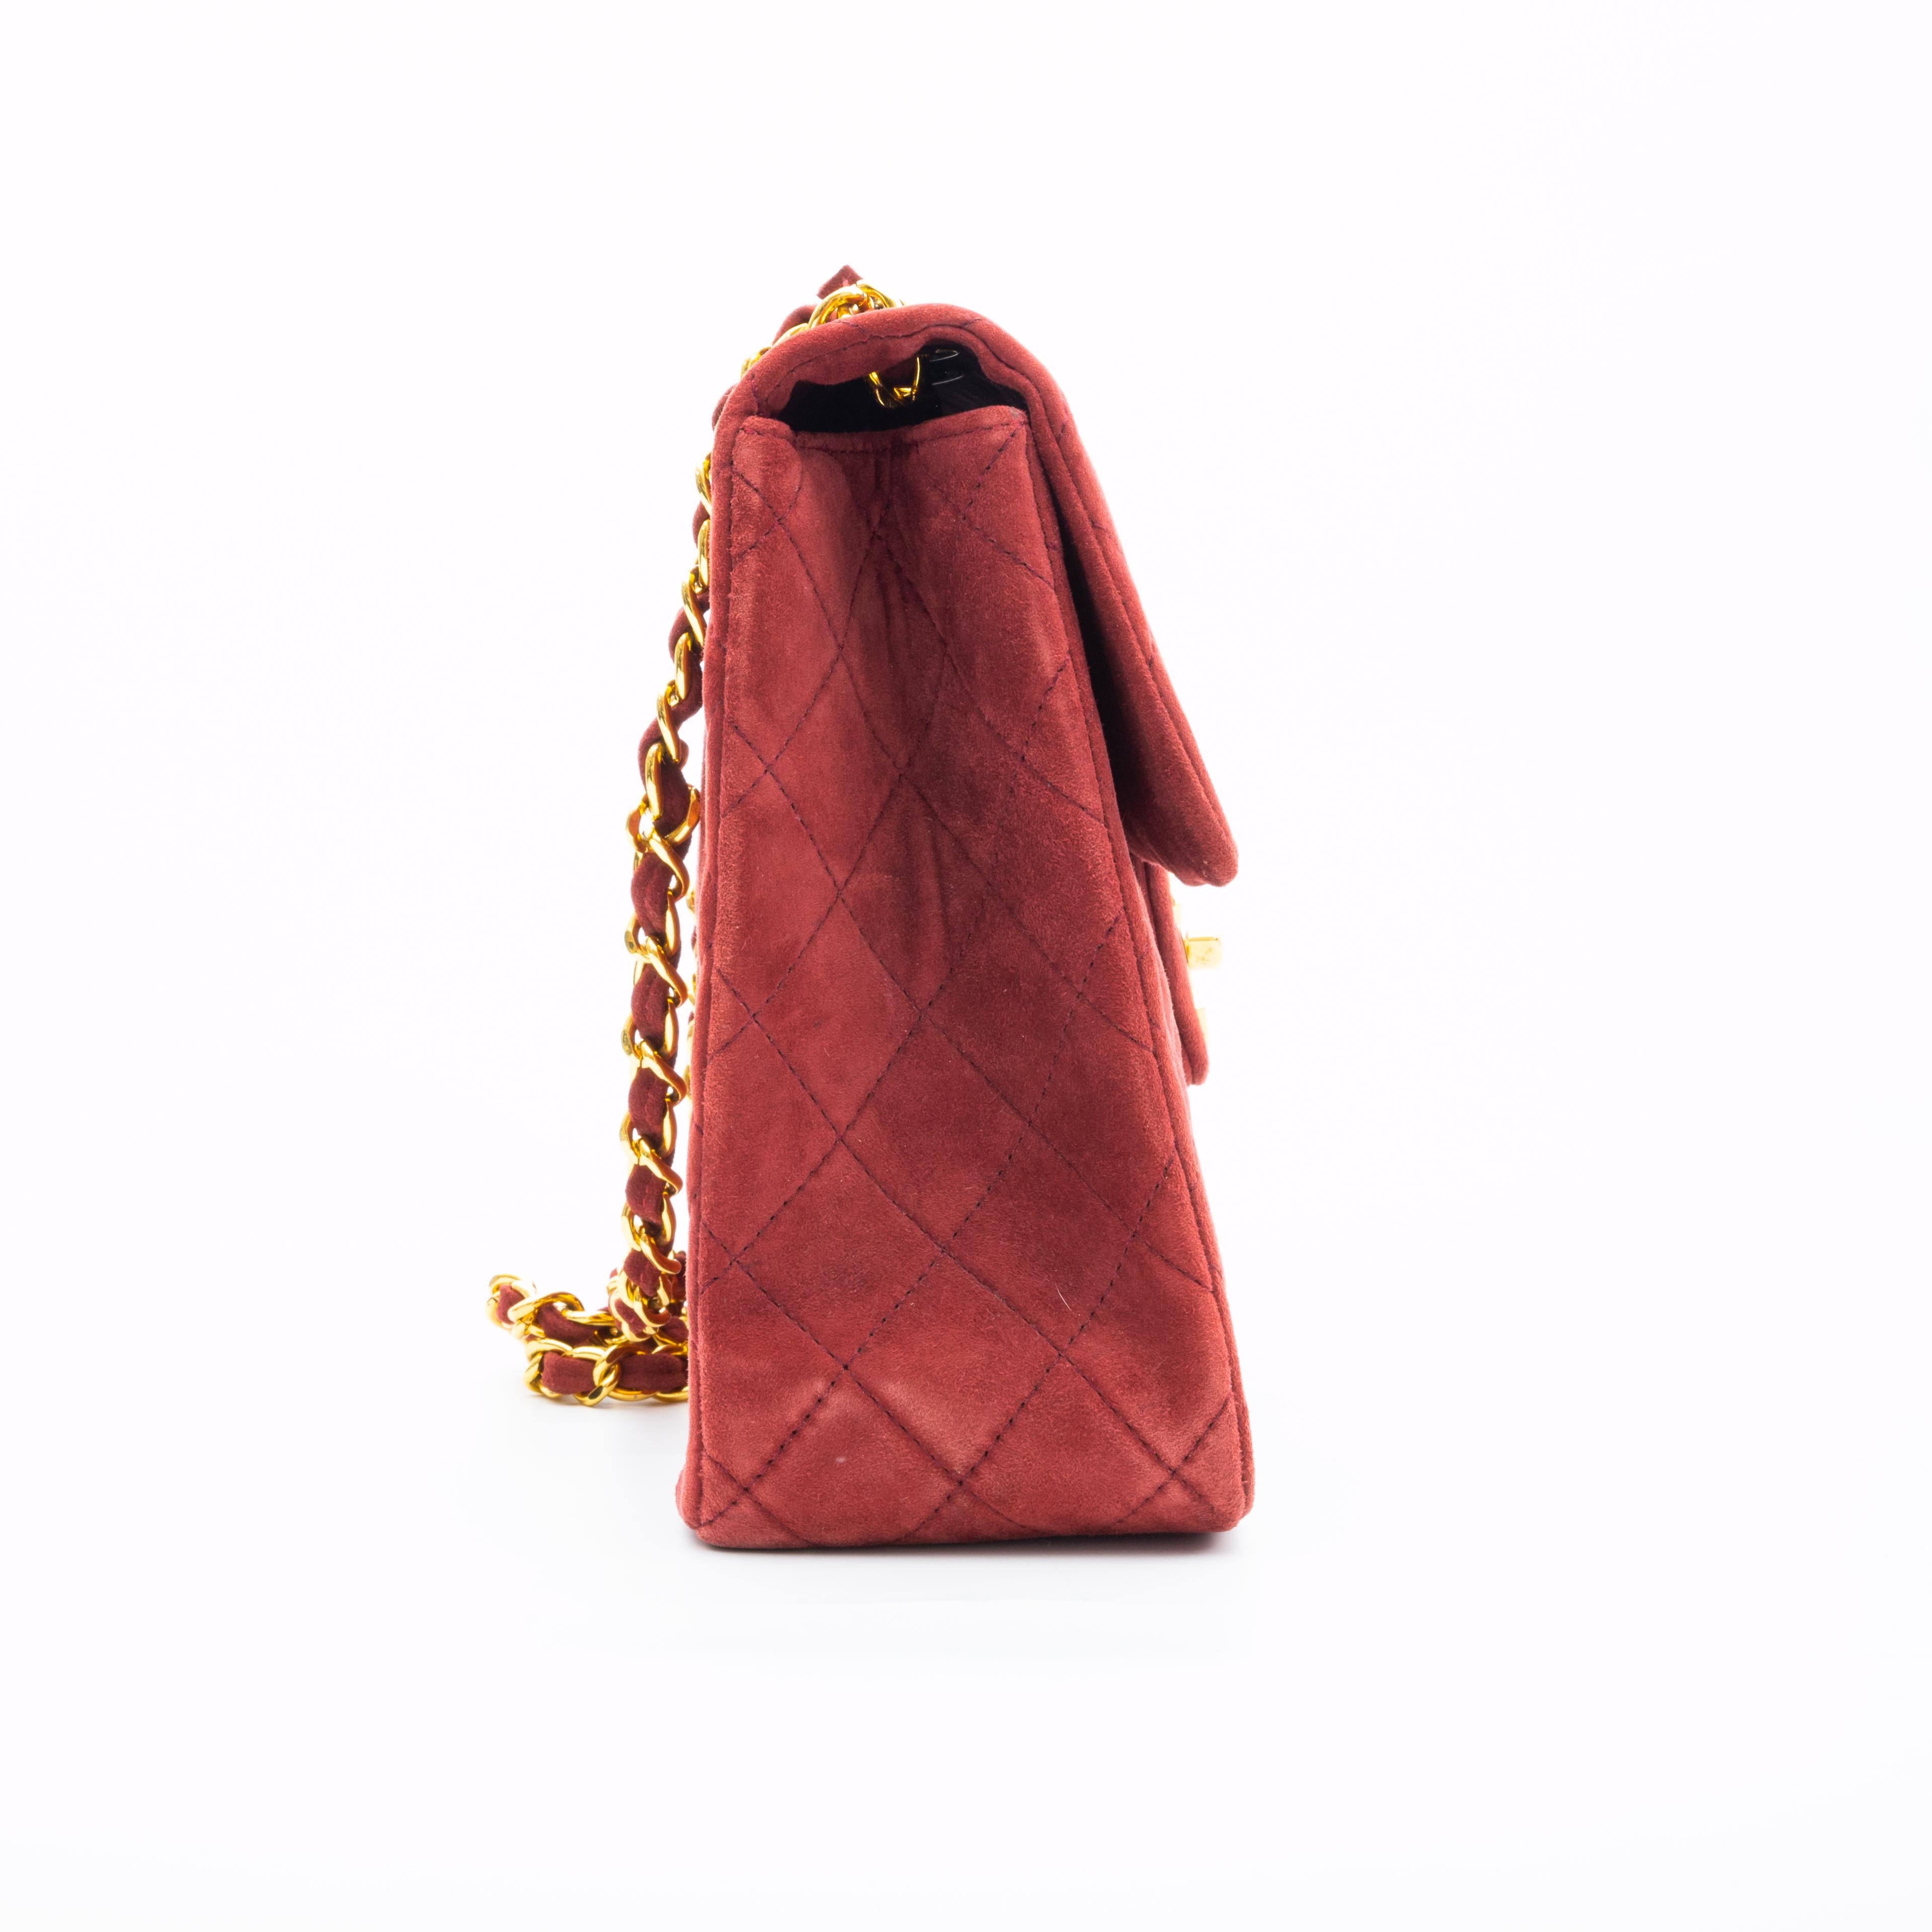 Chanel Classic Quilted Burgundy Suede Jumbo Single Flap Bag 1